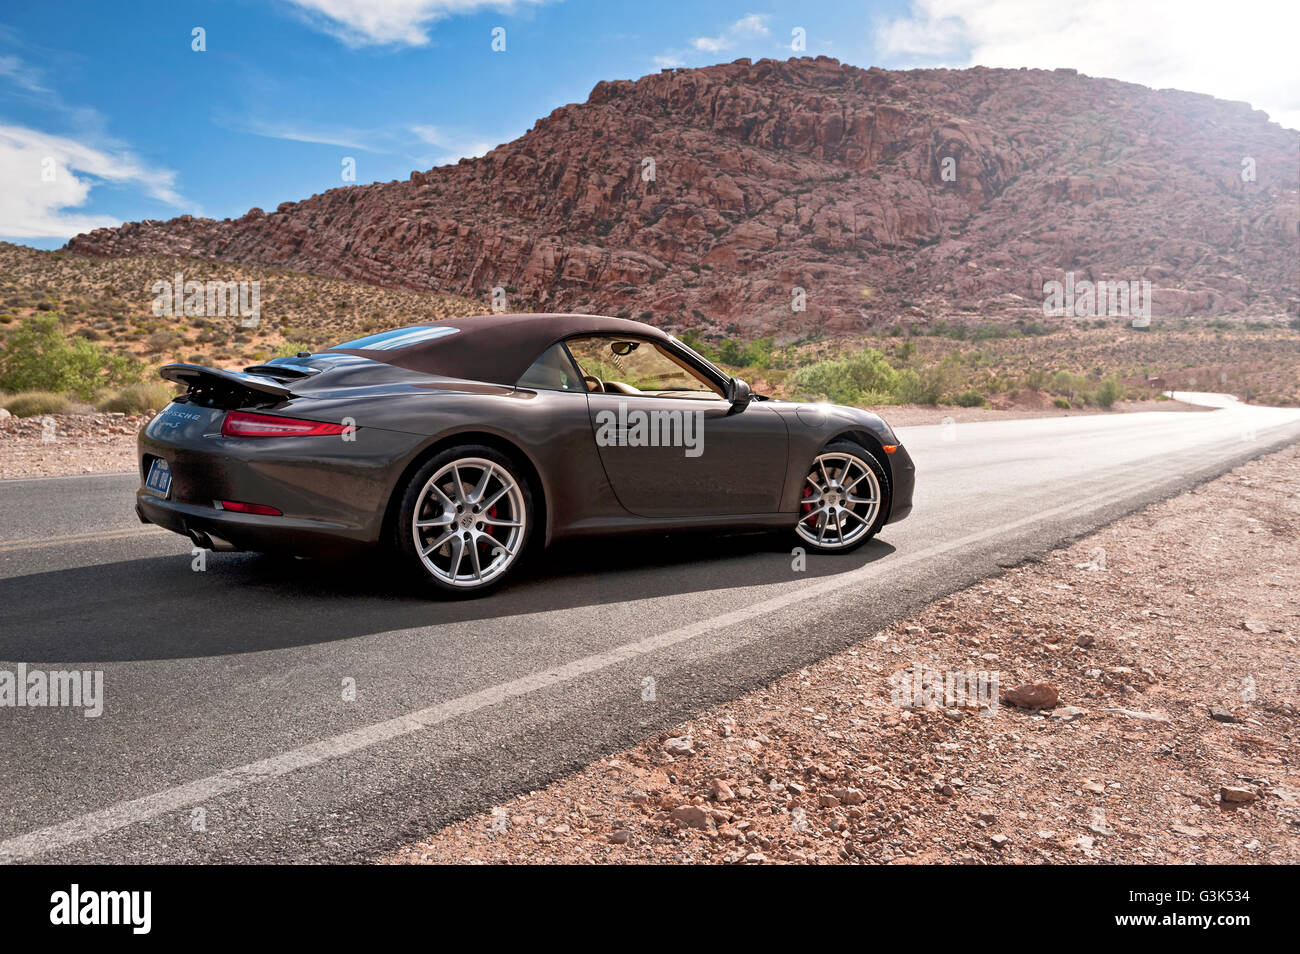 Side view of a Porsche 911 Carrera S on a desert mountain road Stock Photo